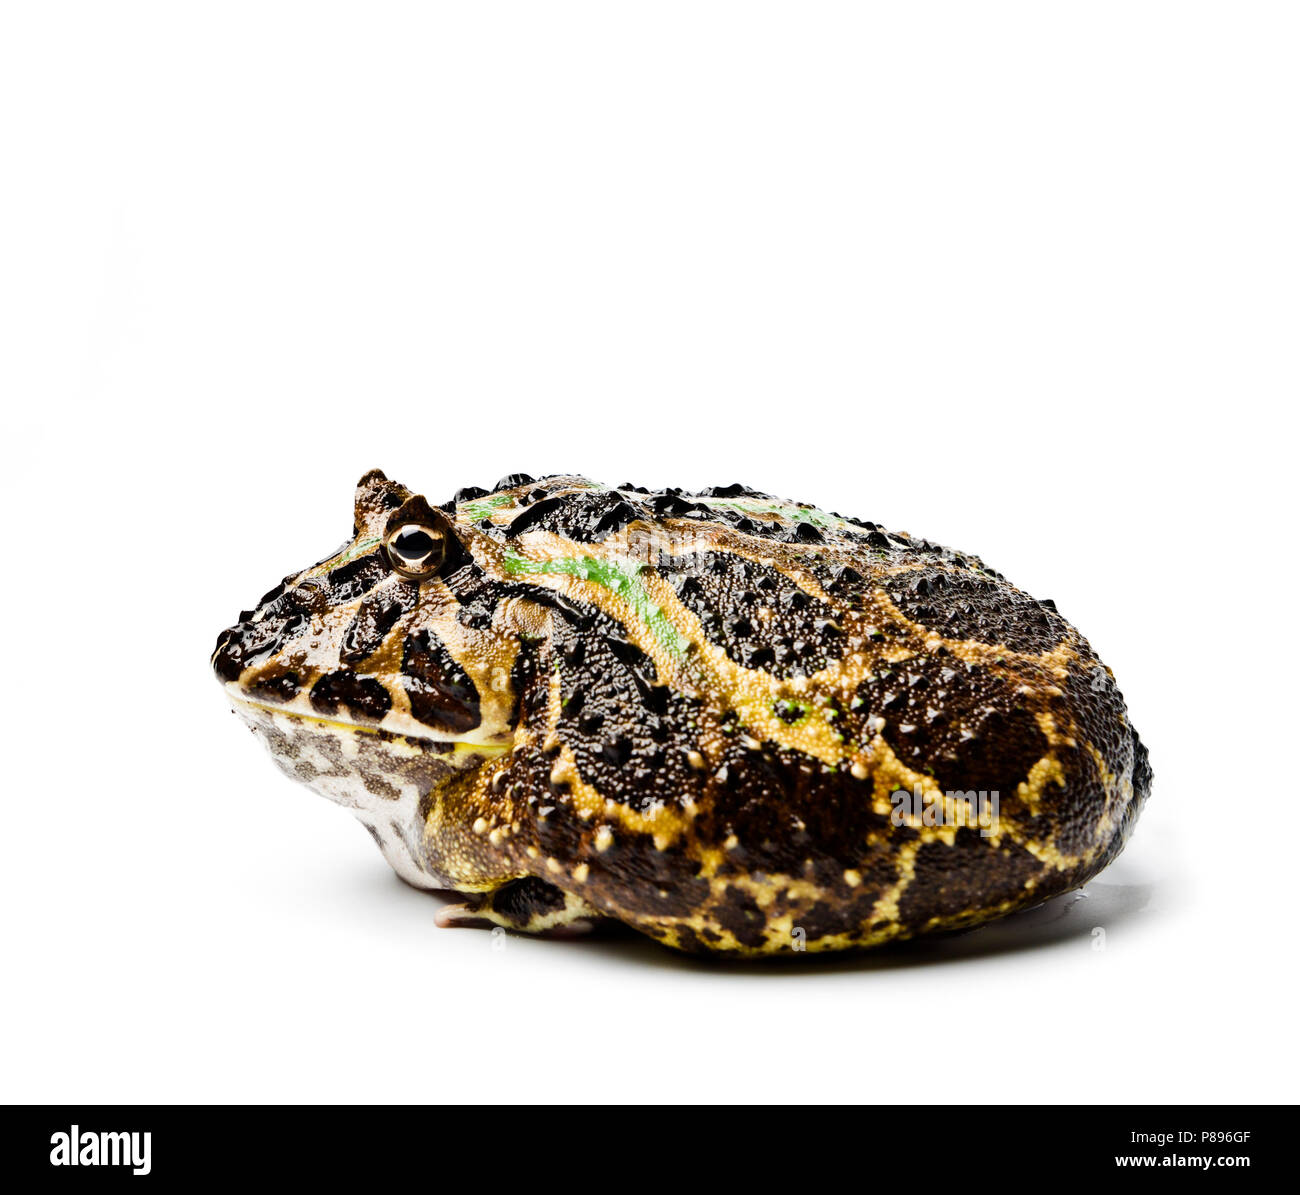 Chacoan horned frog. Chacoan horned frog on white background, amphibians closeup isolated. Ornate frog. Stock Photo